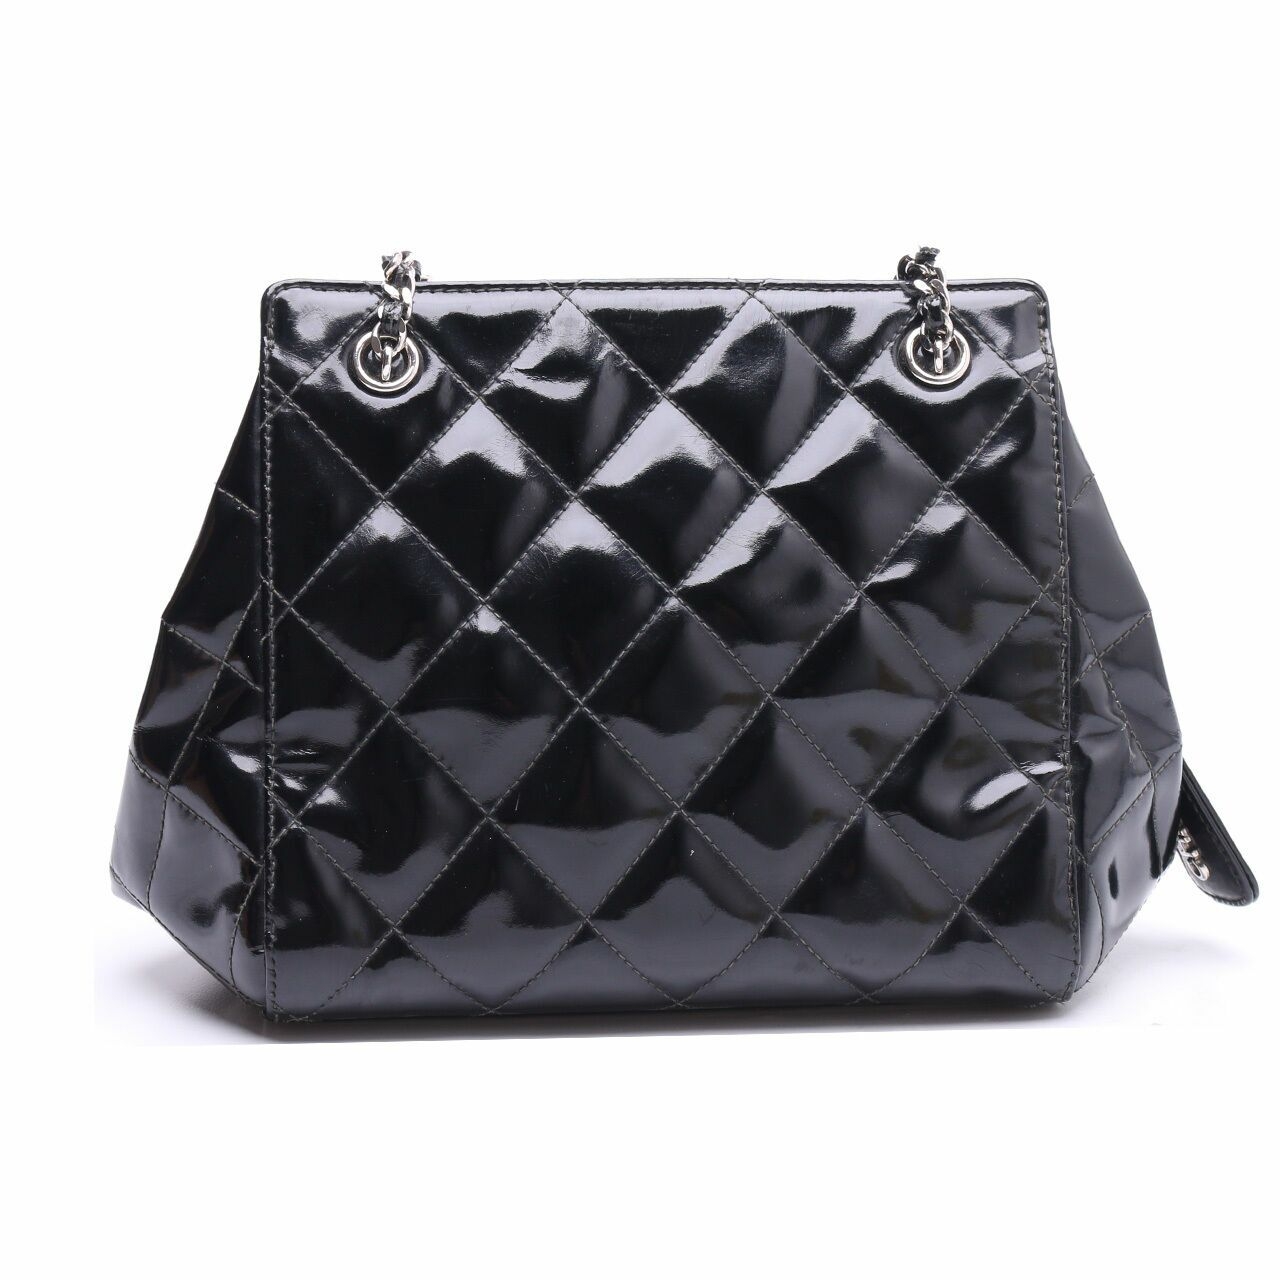 Chanel Quilted Black Patent Leather Sling Bag